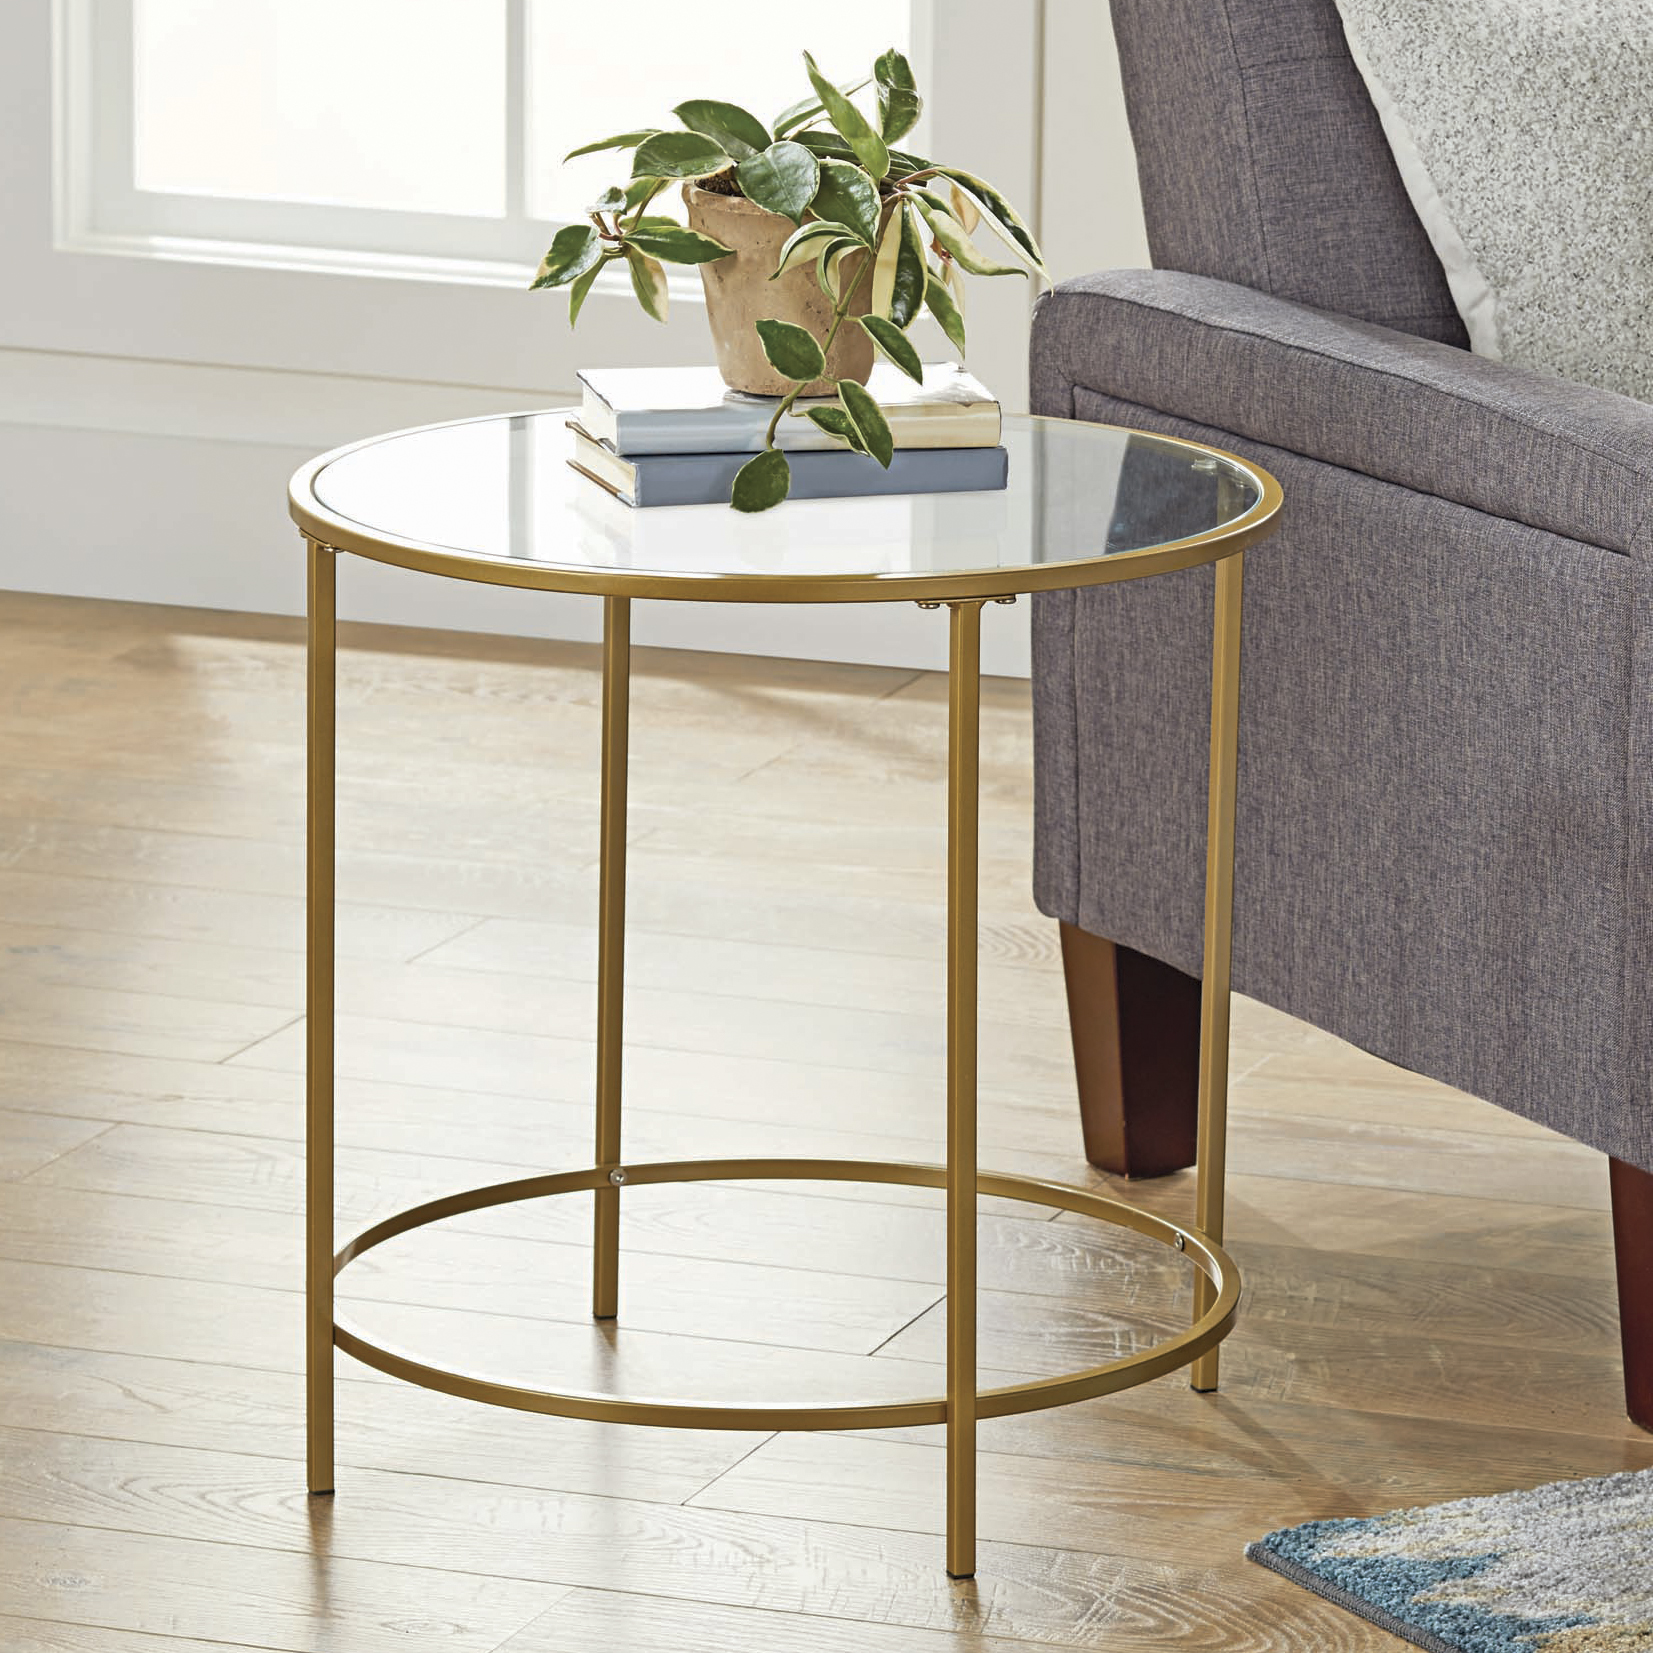 Better Homes & Gardens Nola Side Table, Gold Finish - image 2 of 6